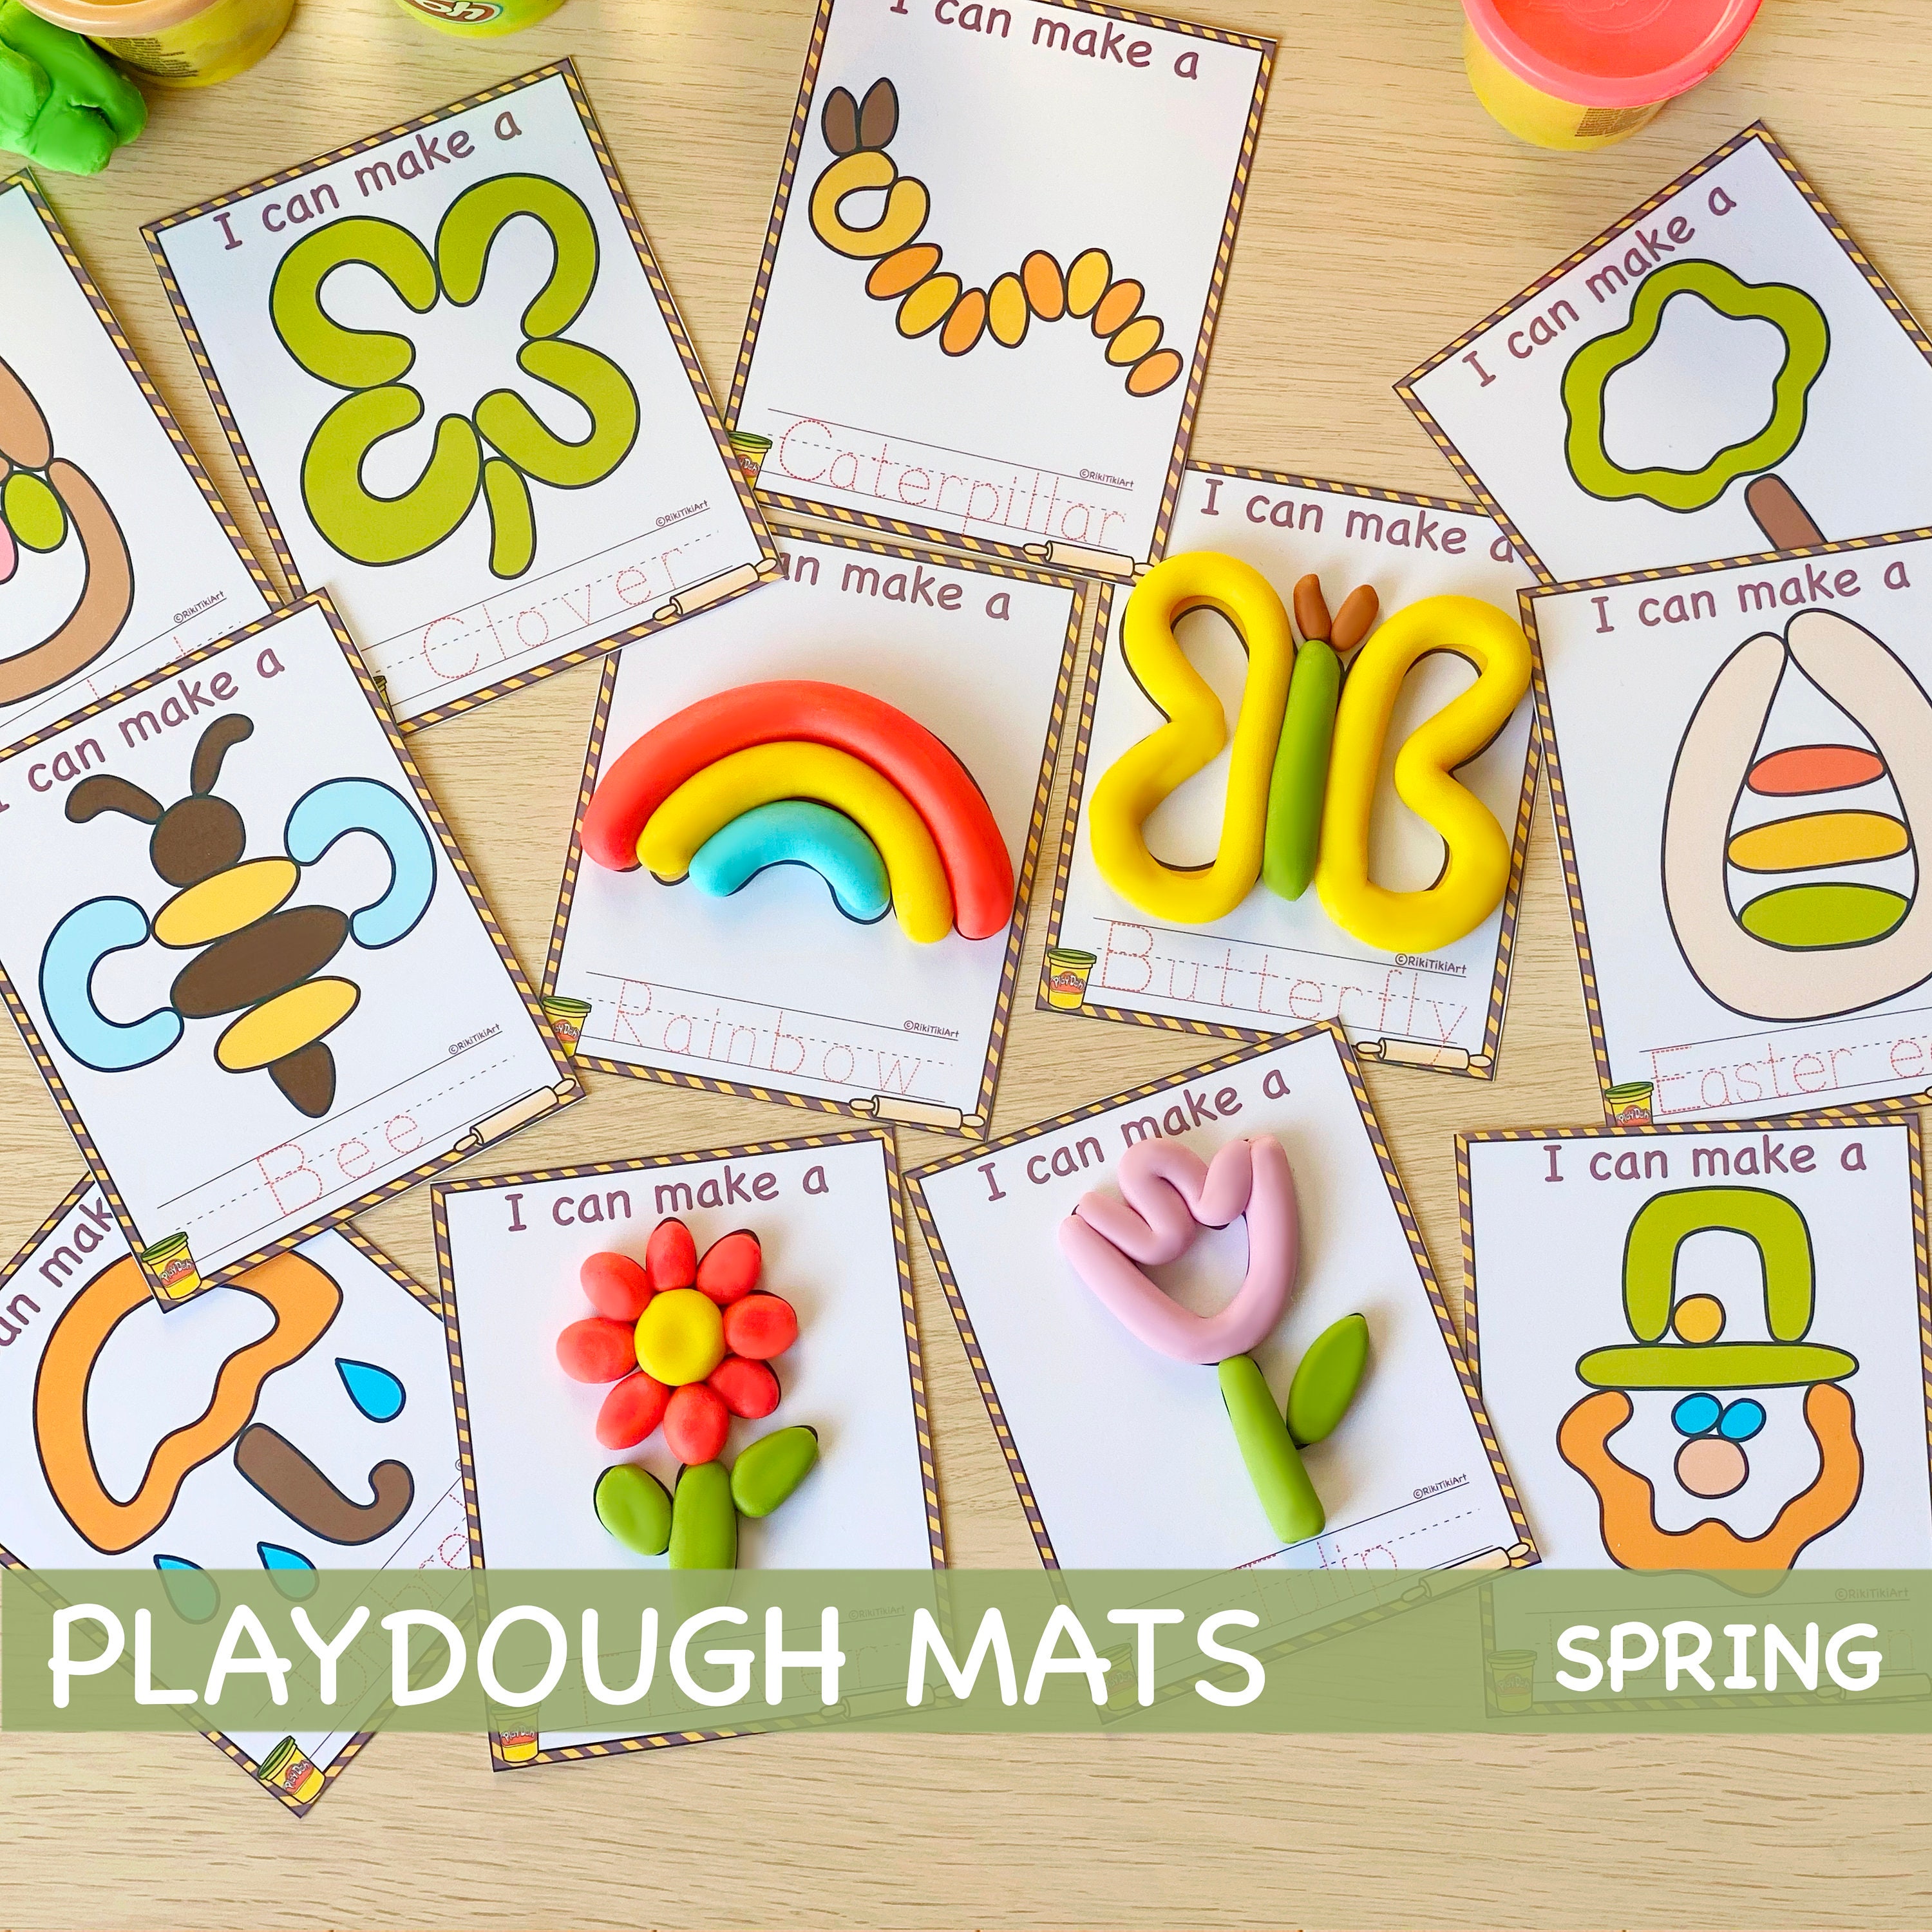 City Play Dough Mats and Accessories